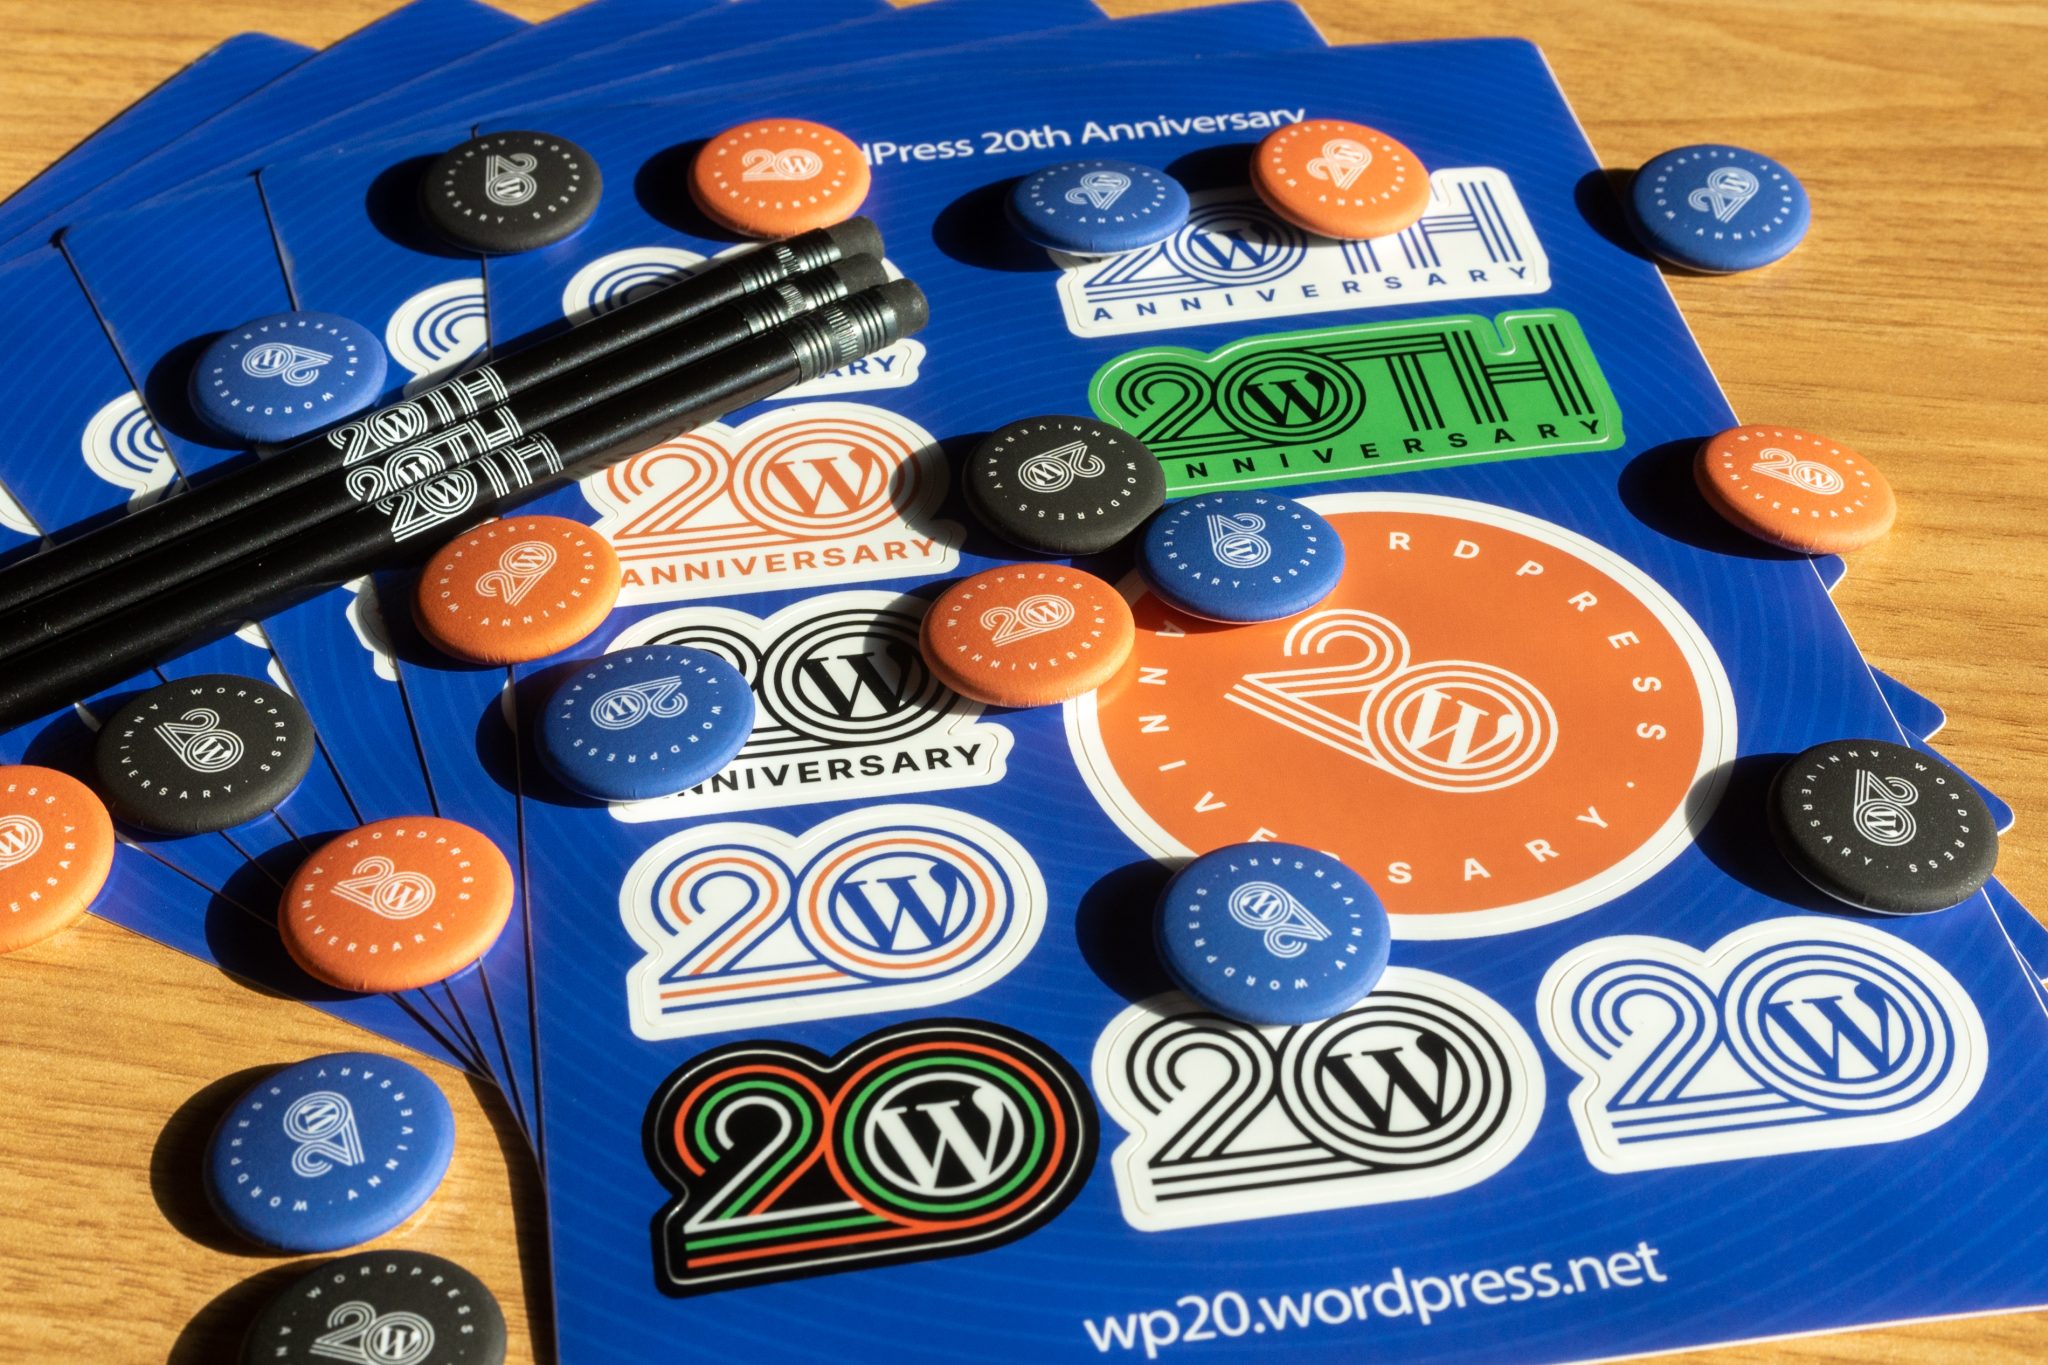 WP20 Swags for Meetups celebrating 20th Anniversary of WordPress. Includes stickers, pencil and 3 color variations of Pinback Buttons.